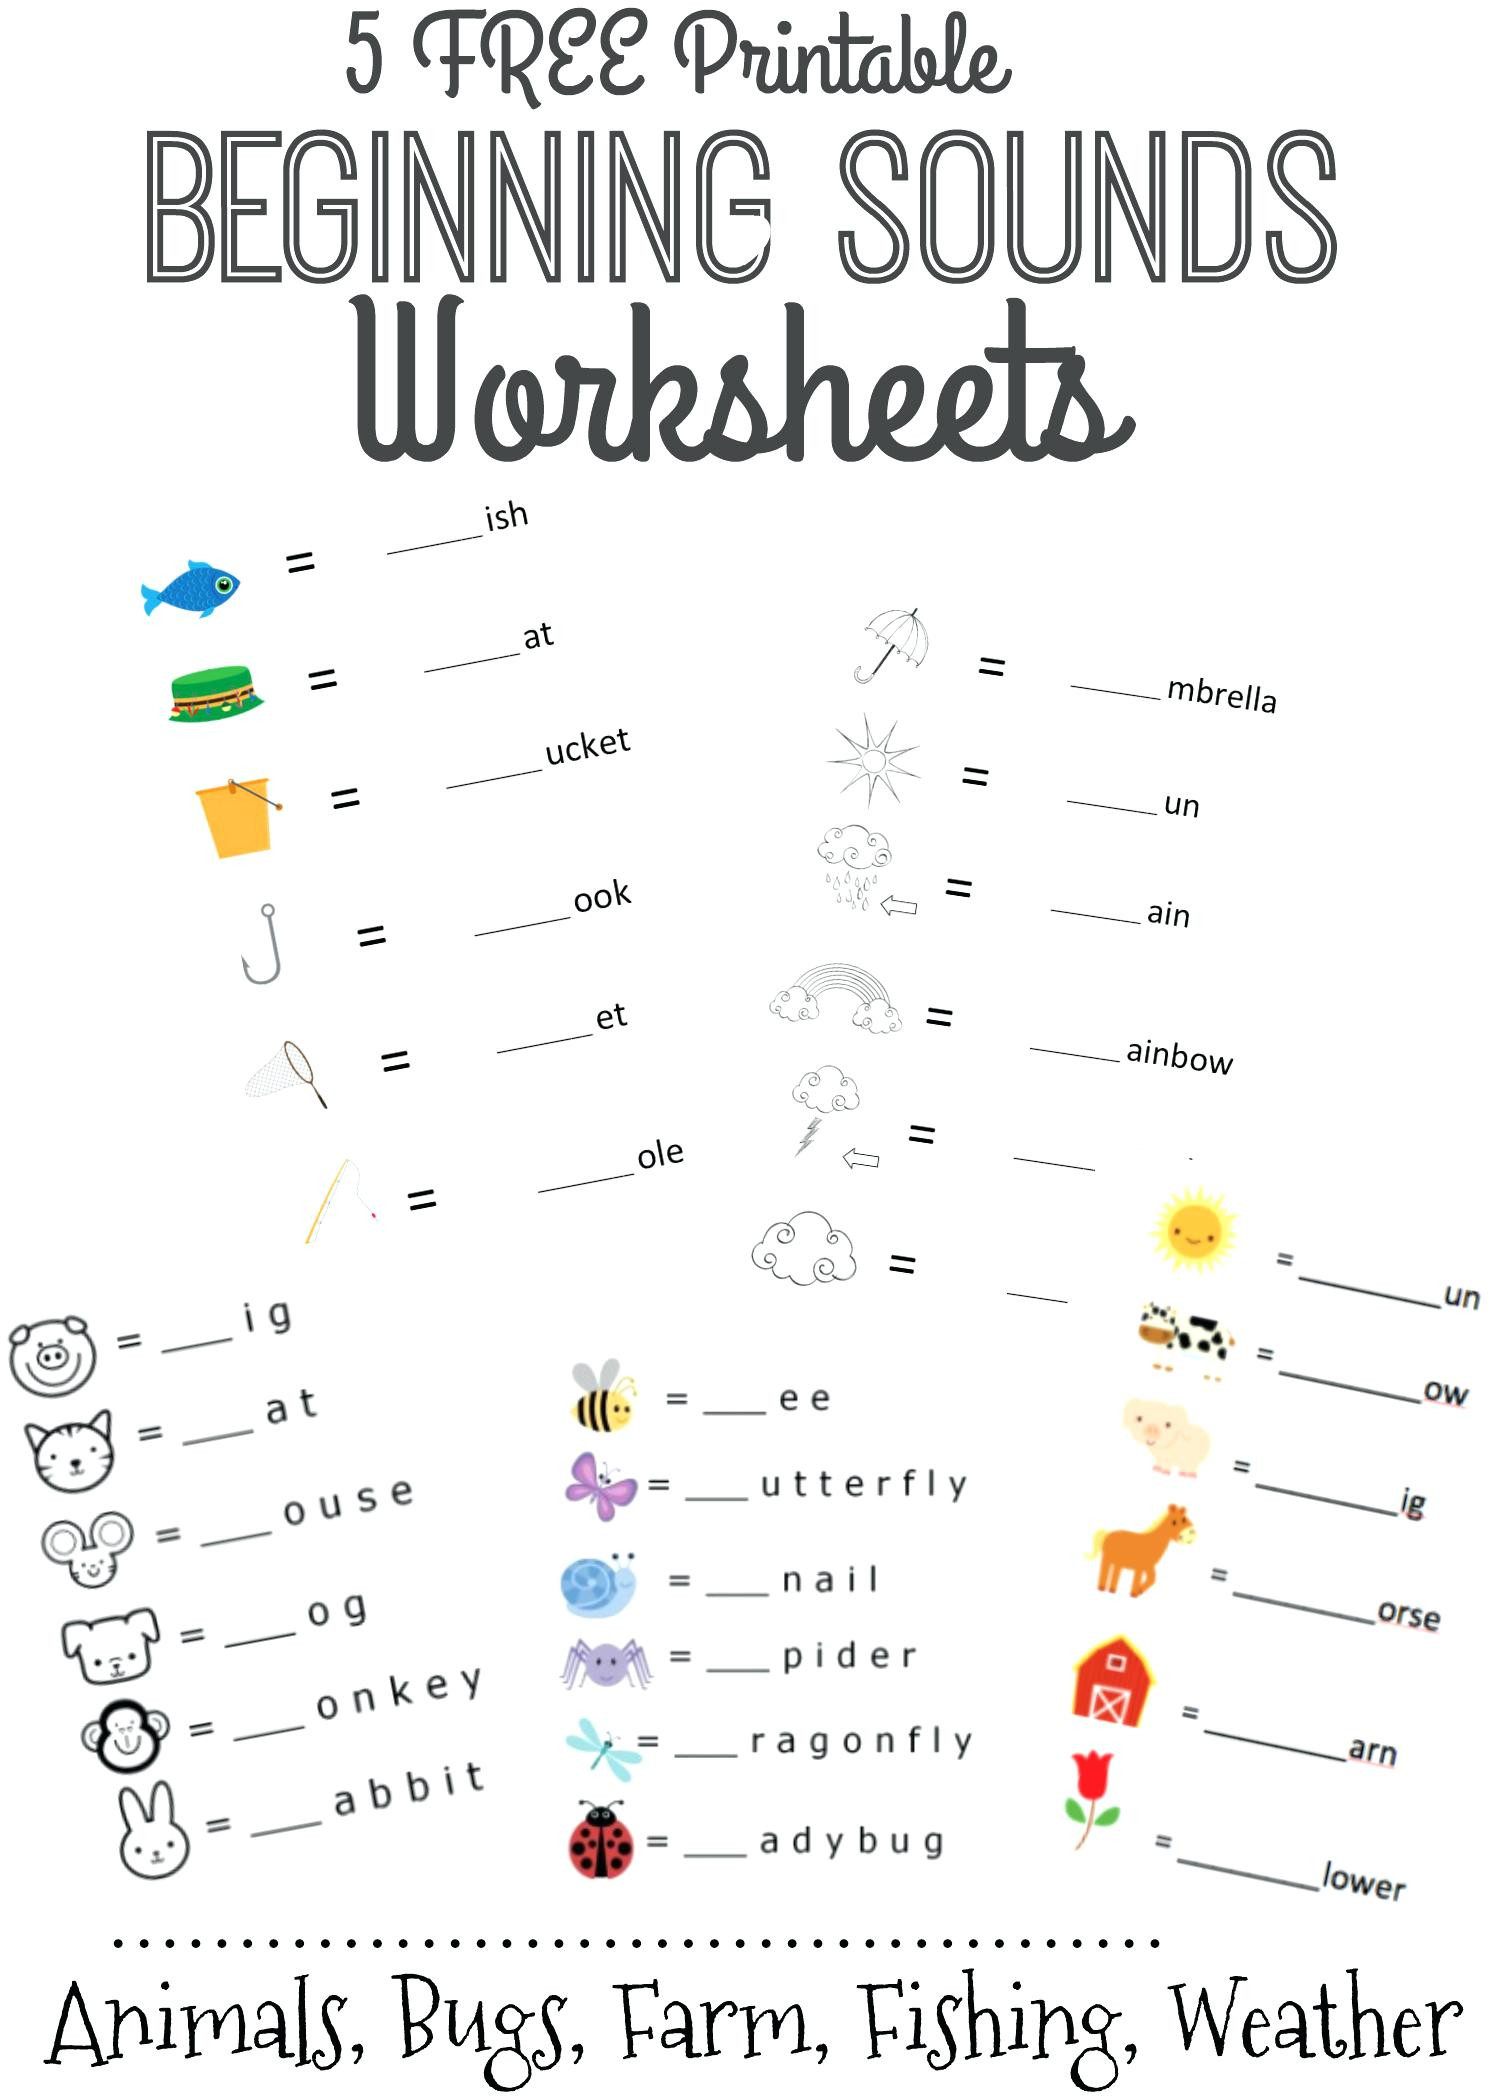 worksheet ideas printable worksheets collection of five beginning for year olds sounds early